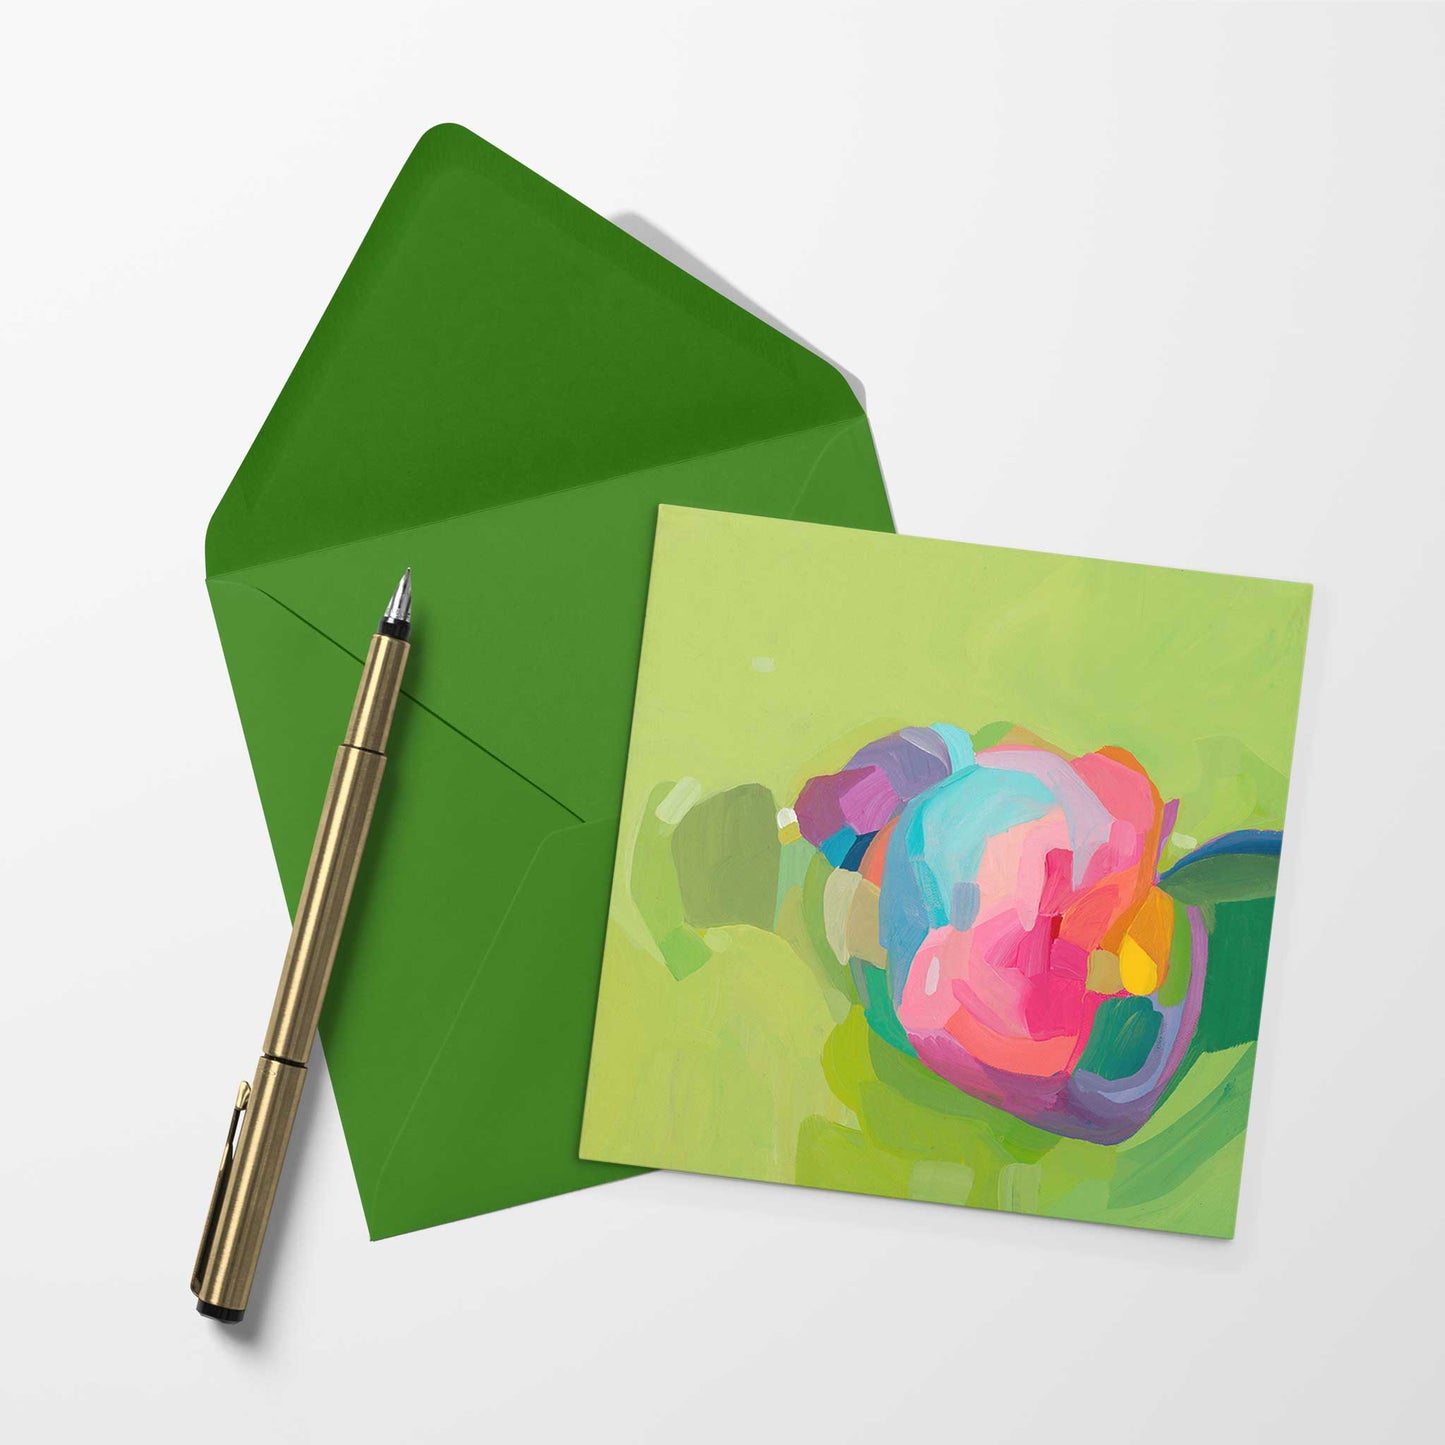 blank art card with green abstract artwork and matching green envelope